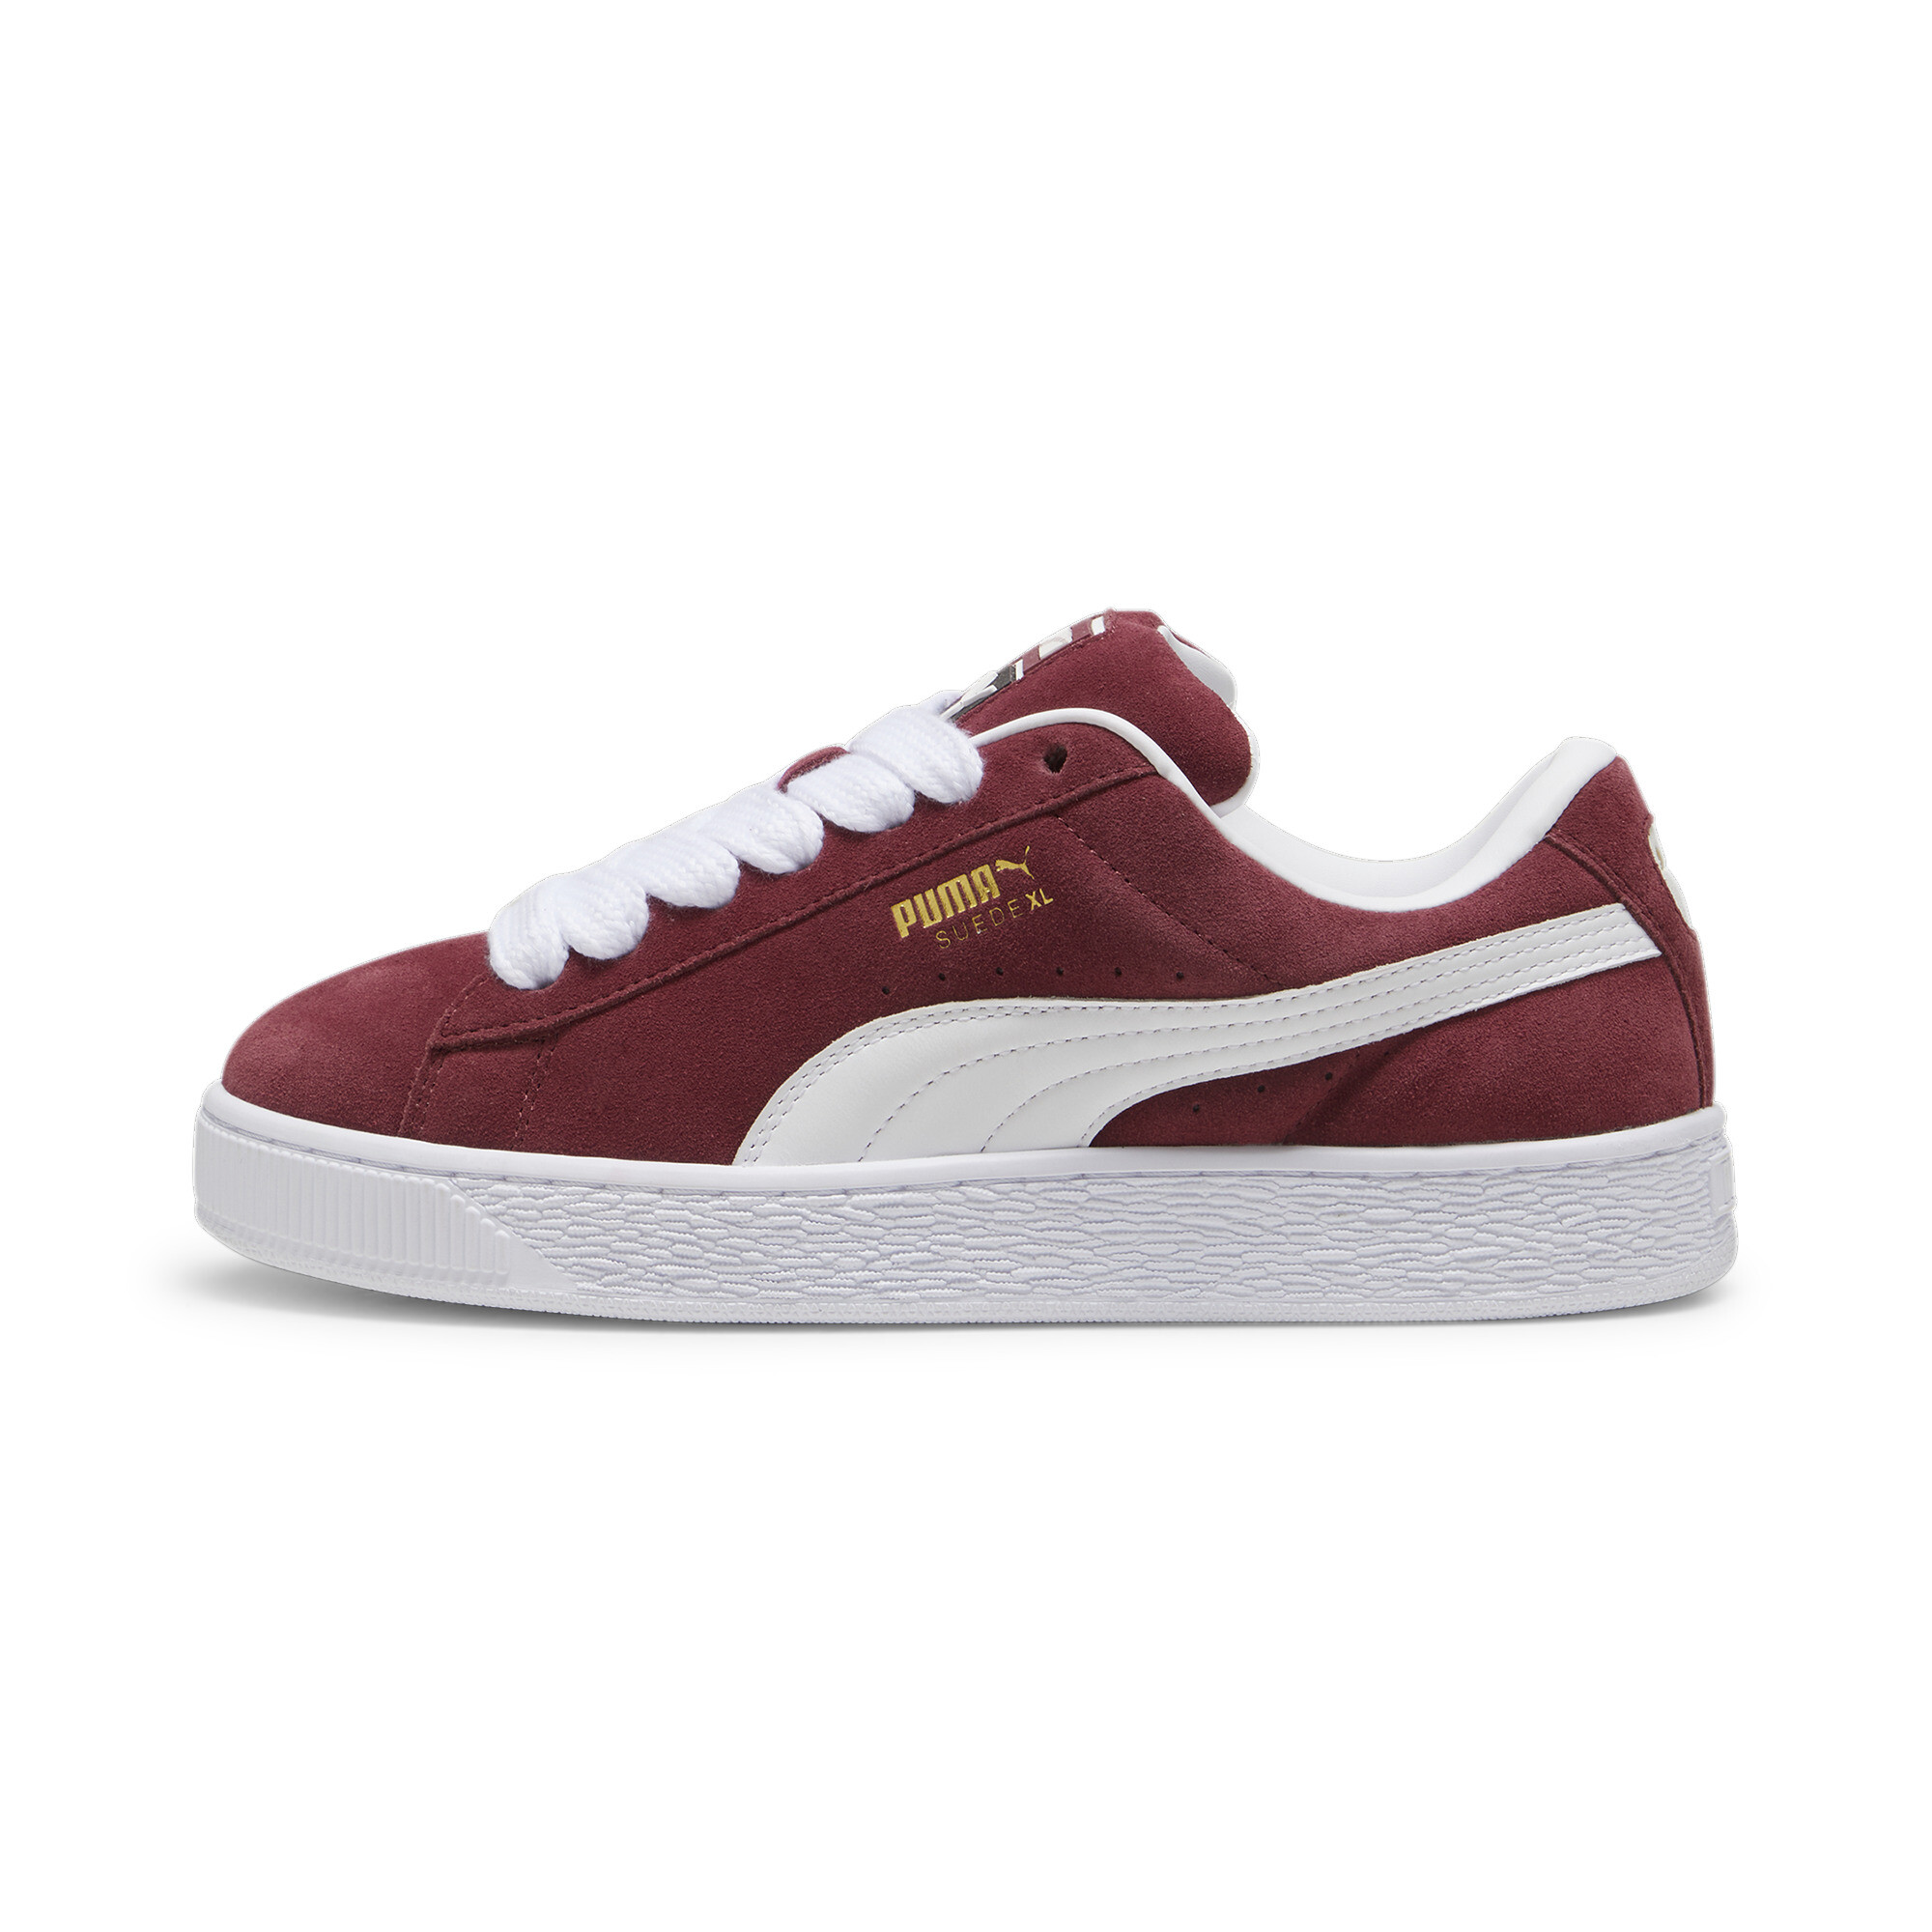 Puma Suede XL Sneakers Unisex, Red, Size 40, Shoes